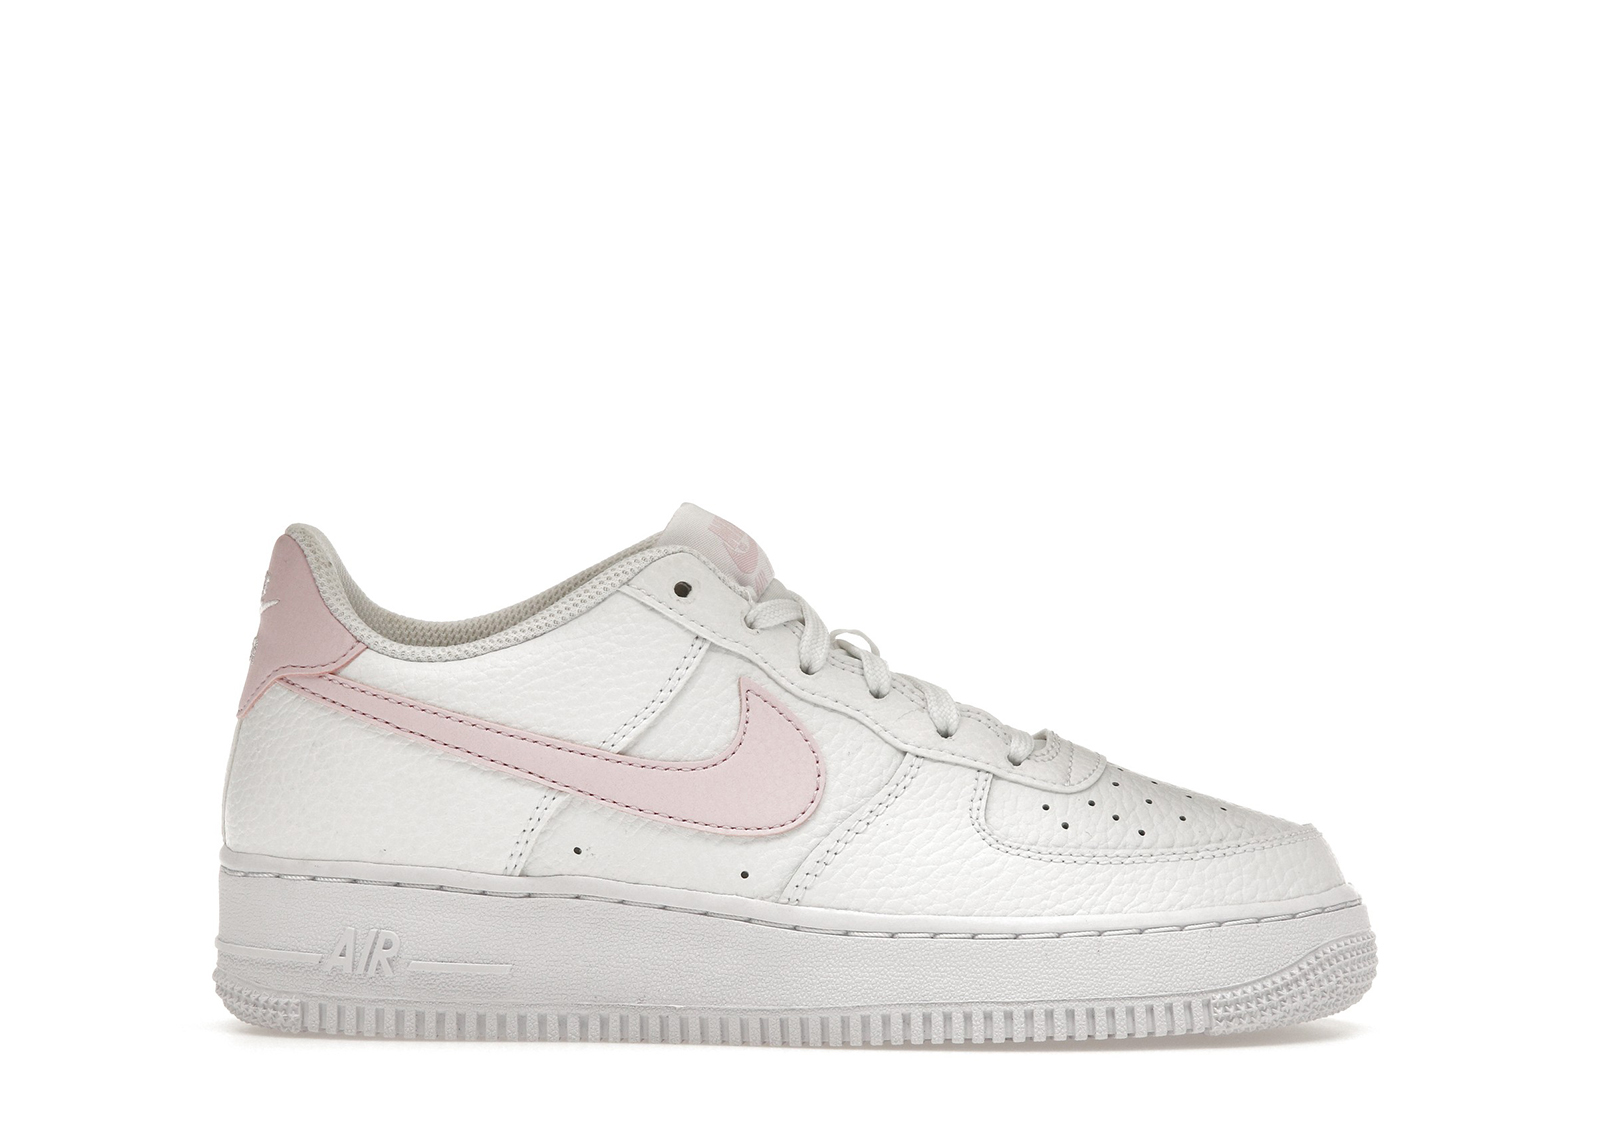 Nike Air Force 1 Low Pink Foam White (GS) Kids' - CT3839-103 - US